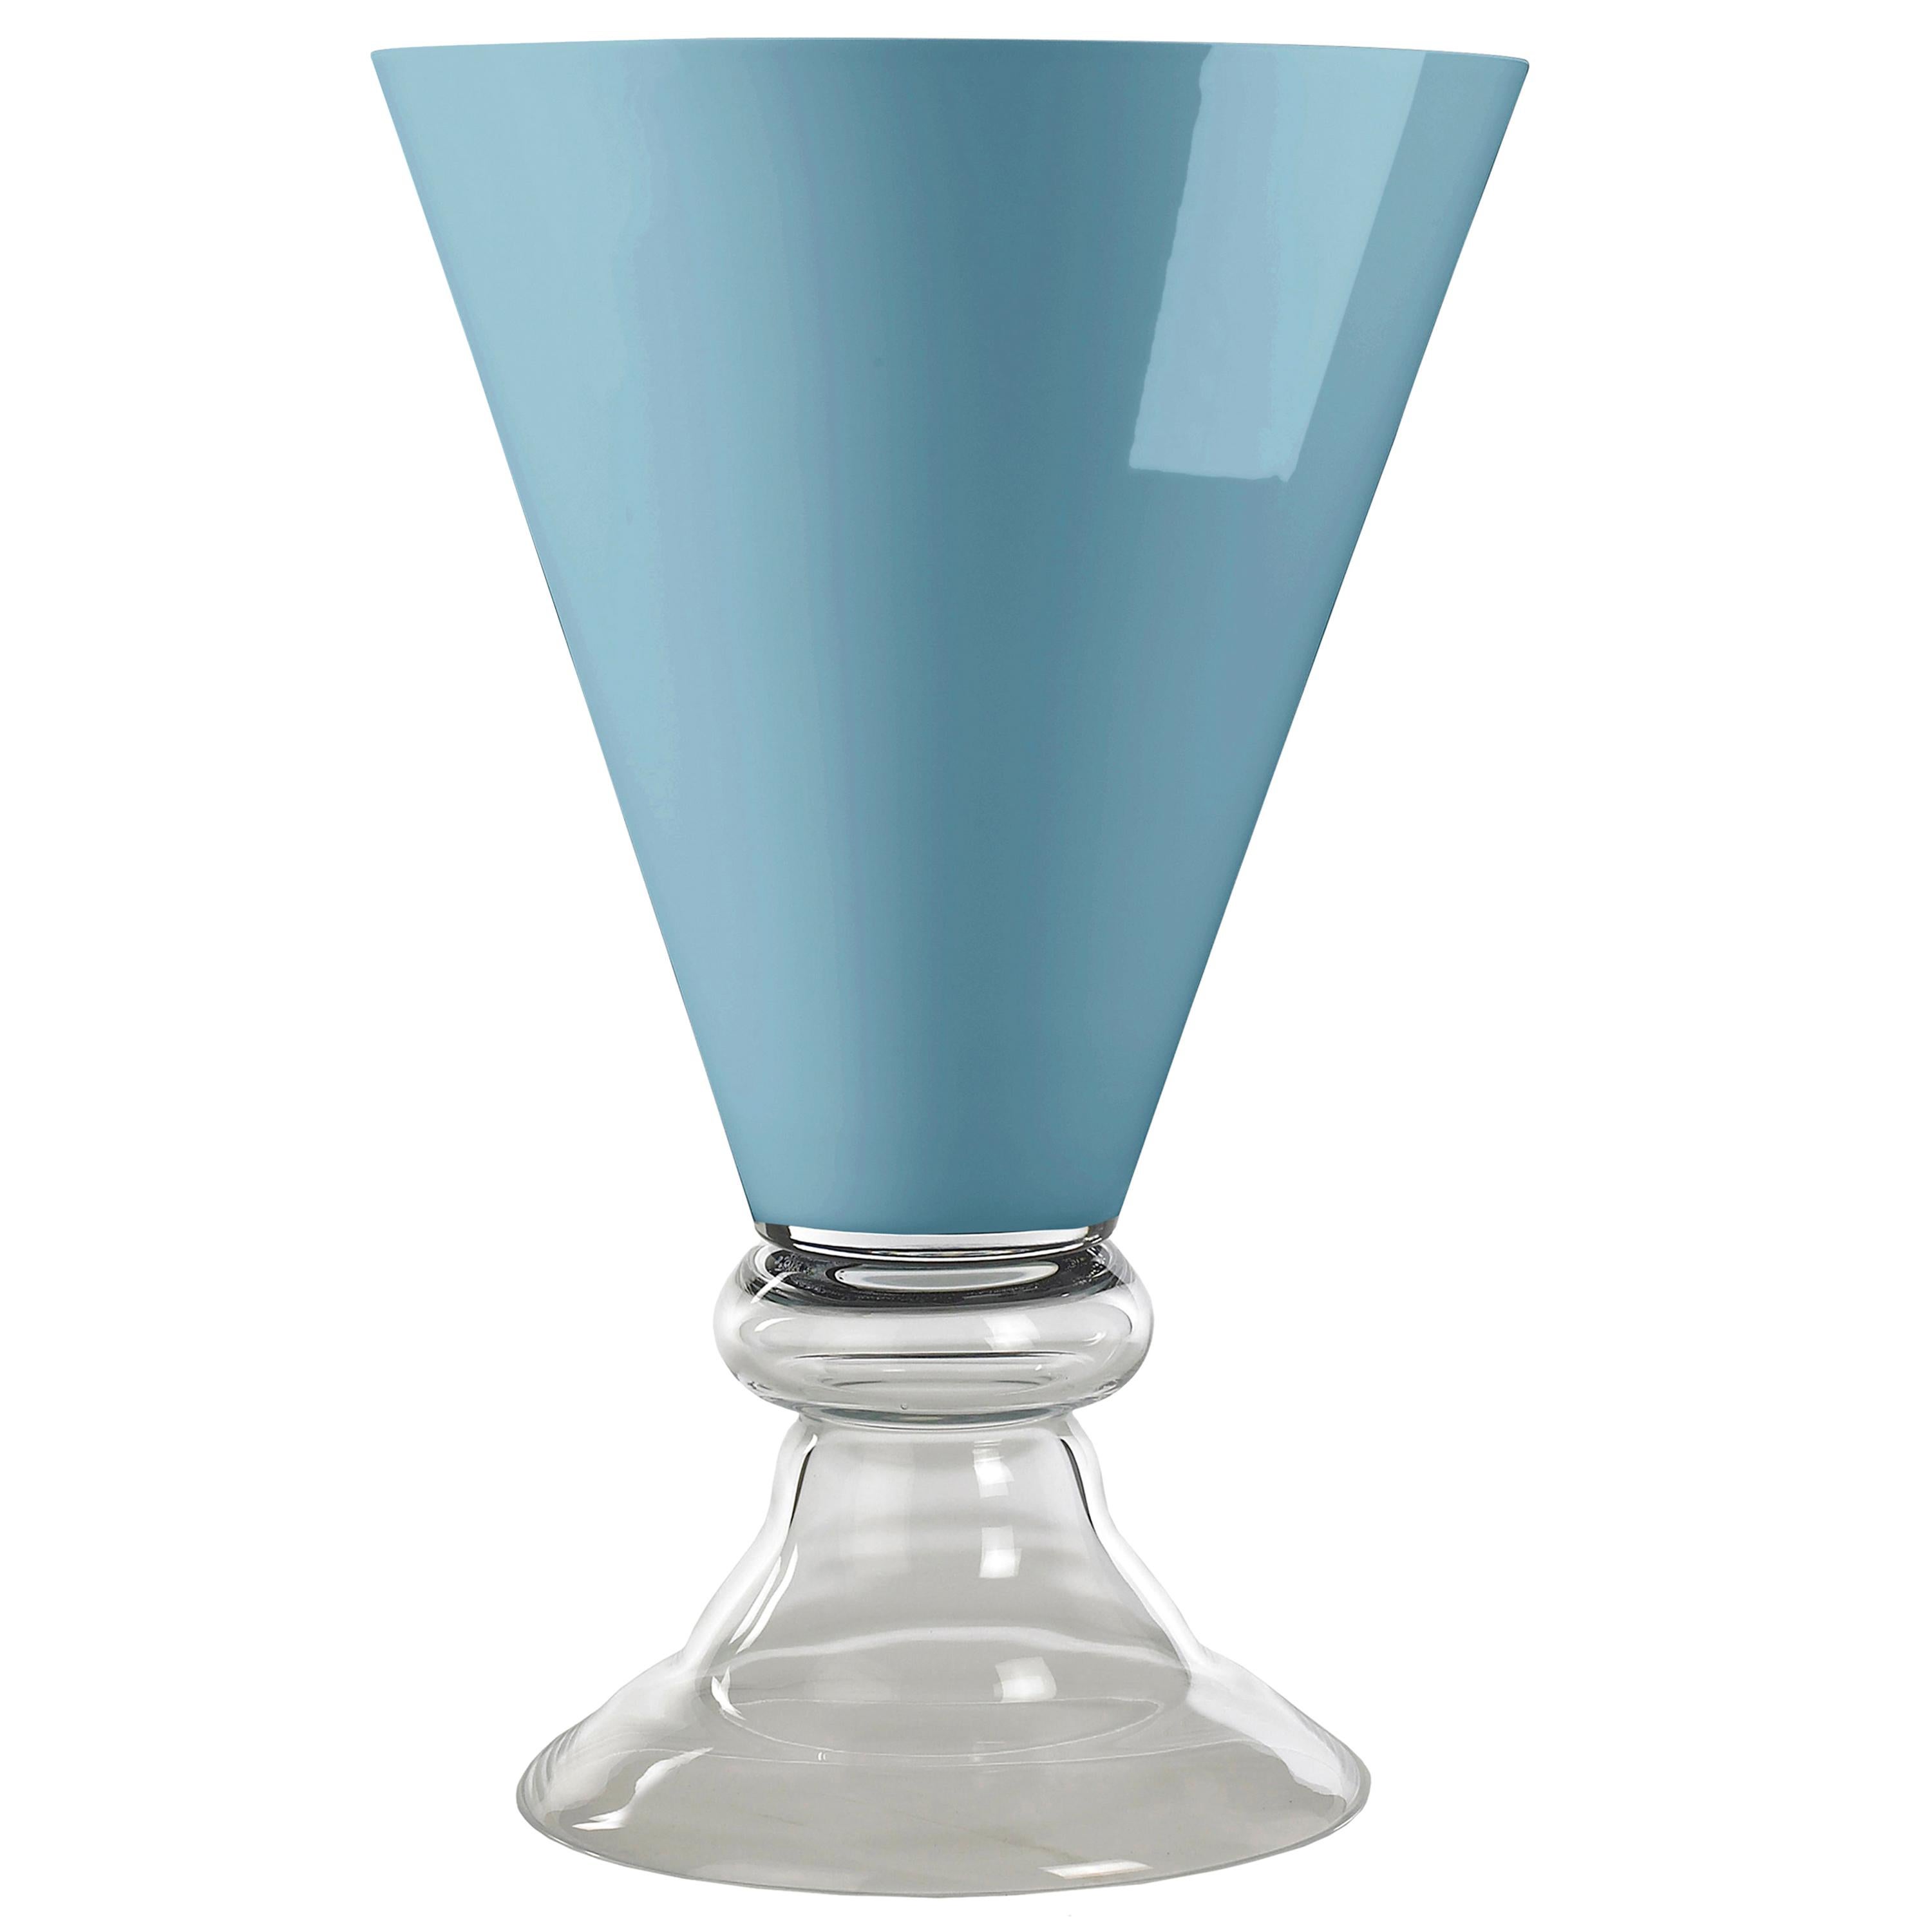 Bowl New Romantic, Purist Blue Color, 2020 Trend, in Glass, Italy